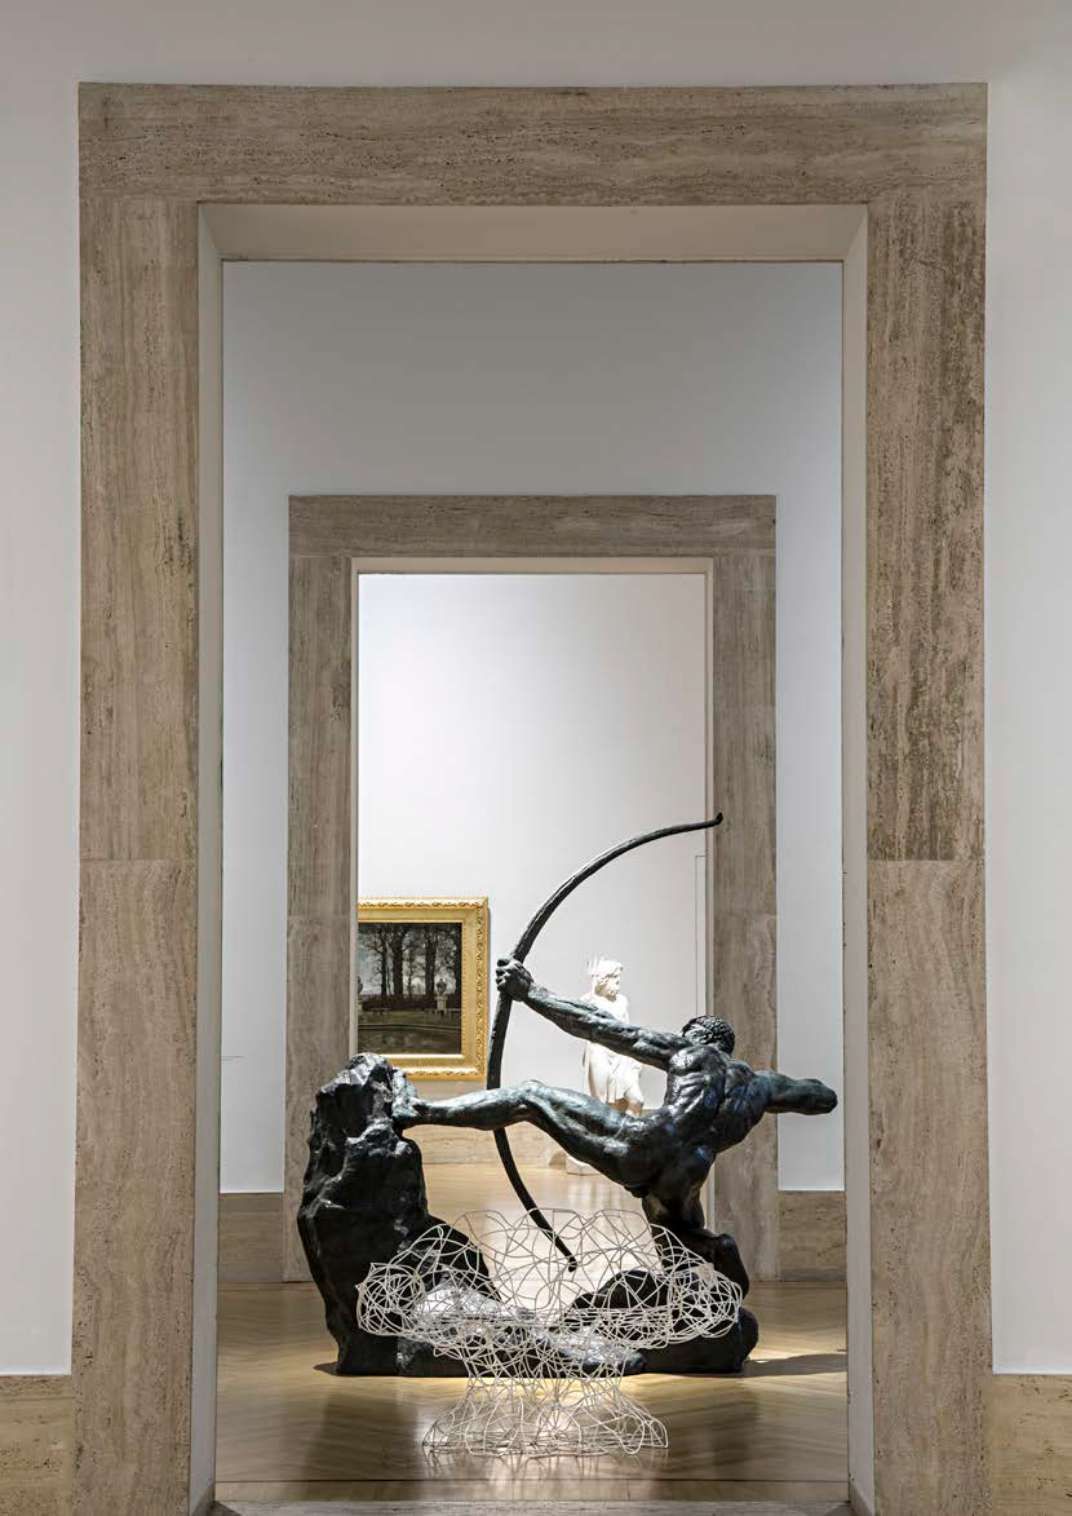   Corallo  
The armchair by Fernando and Humberto Campana in front of the sculpture "Héraklès archer" by Antoine Bourdelle, 1909 